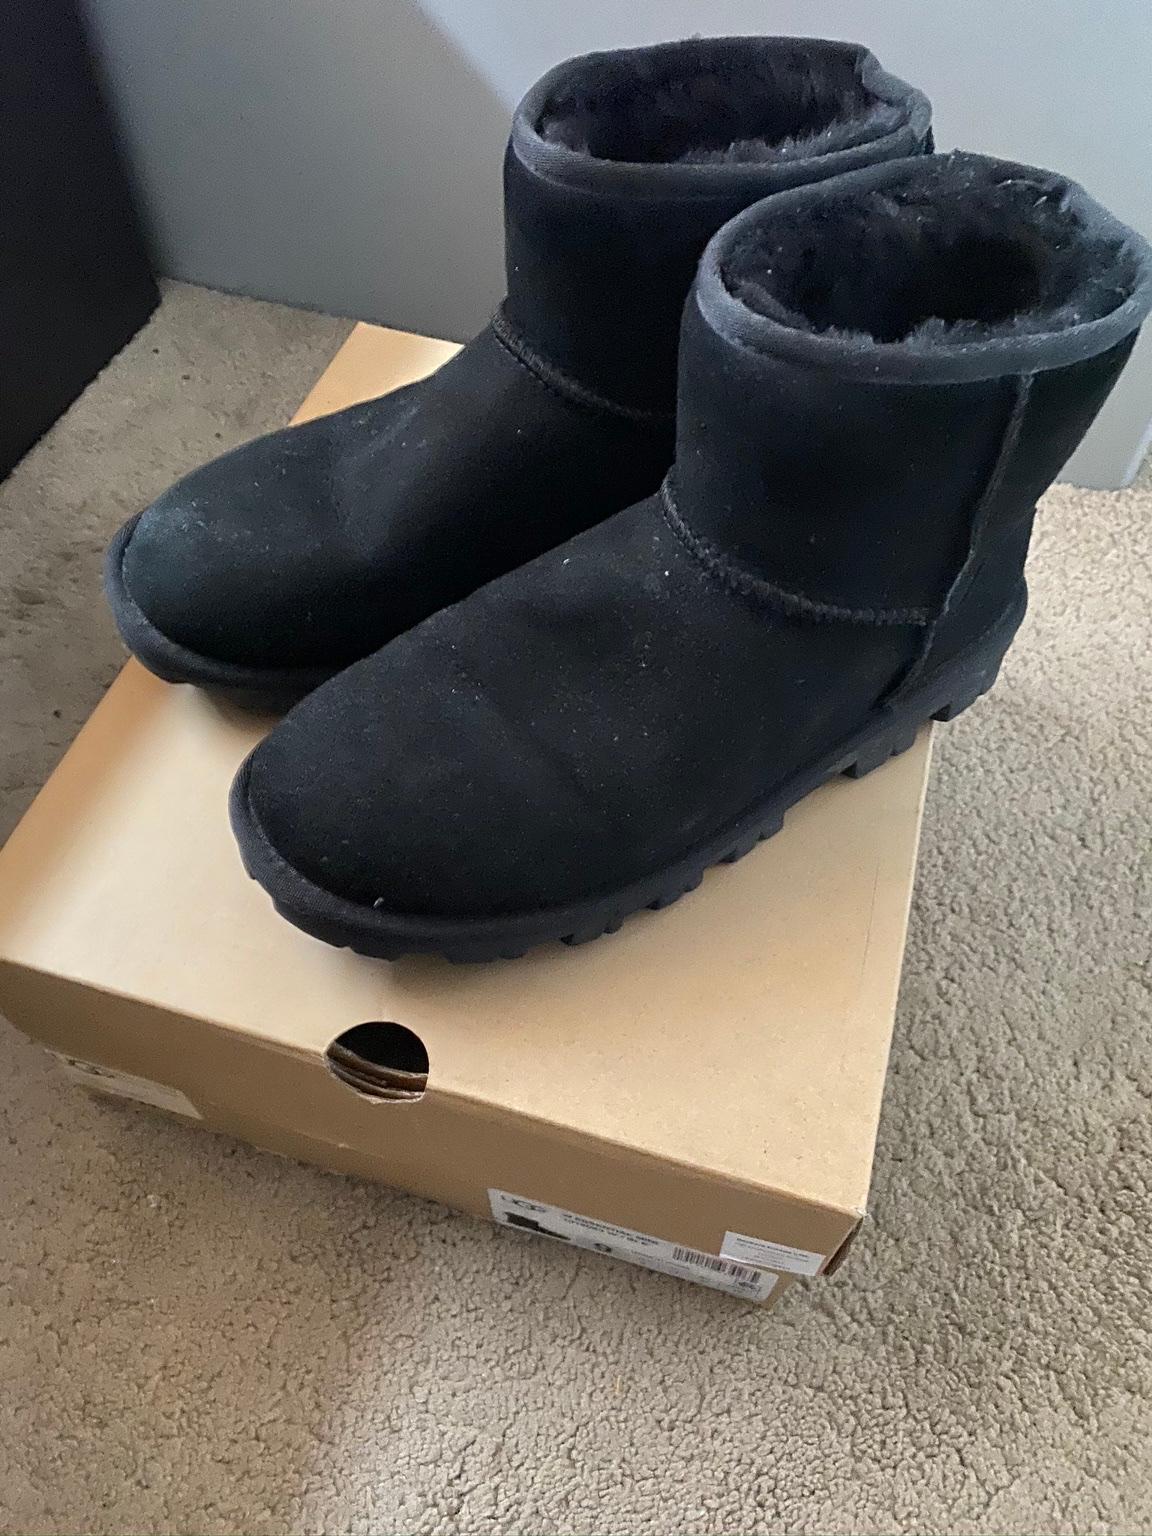 UGG essential mini boots in SE24 London 